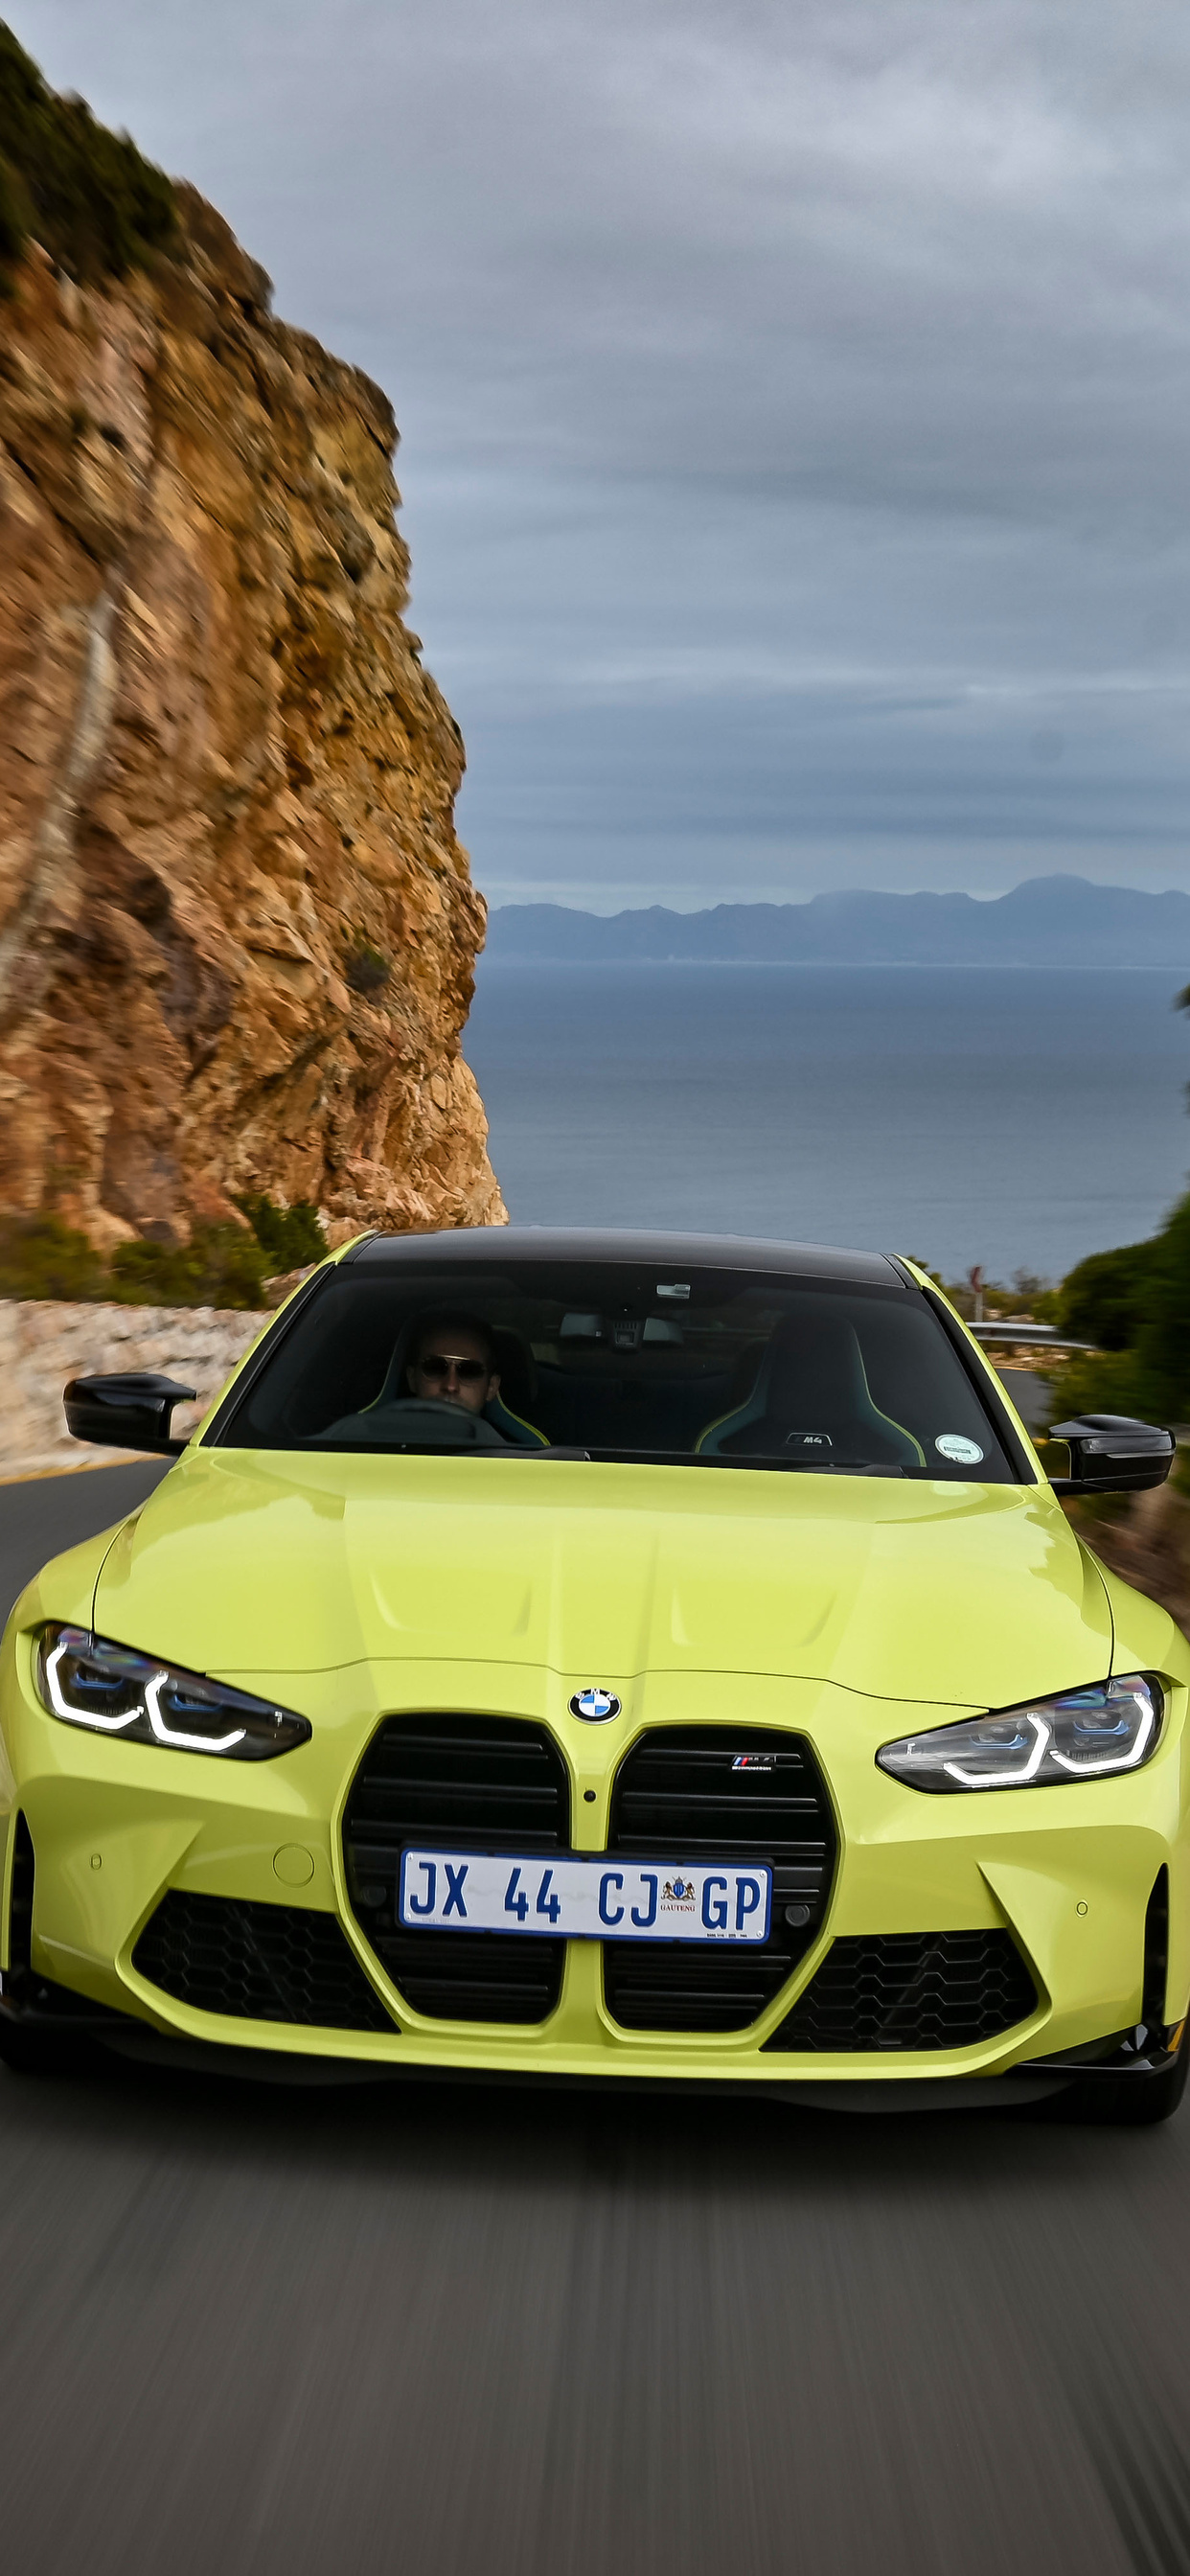 BMW M4, Auto competition, High definition, Striking visuals, 1250x2690 HD Phone